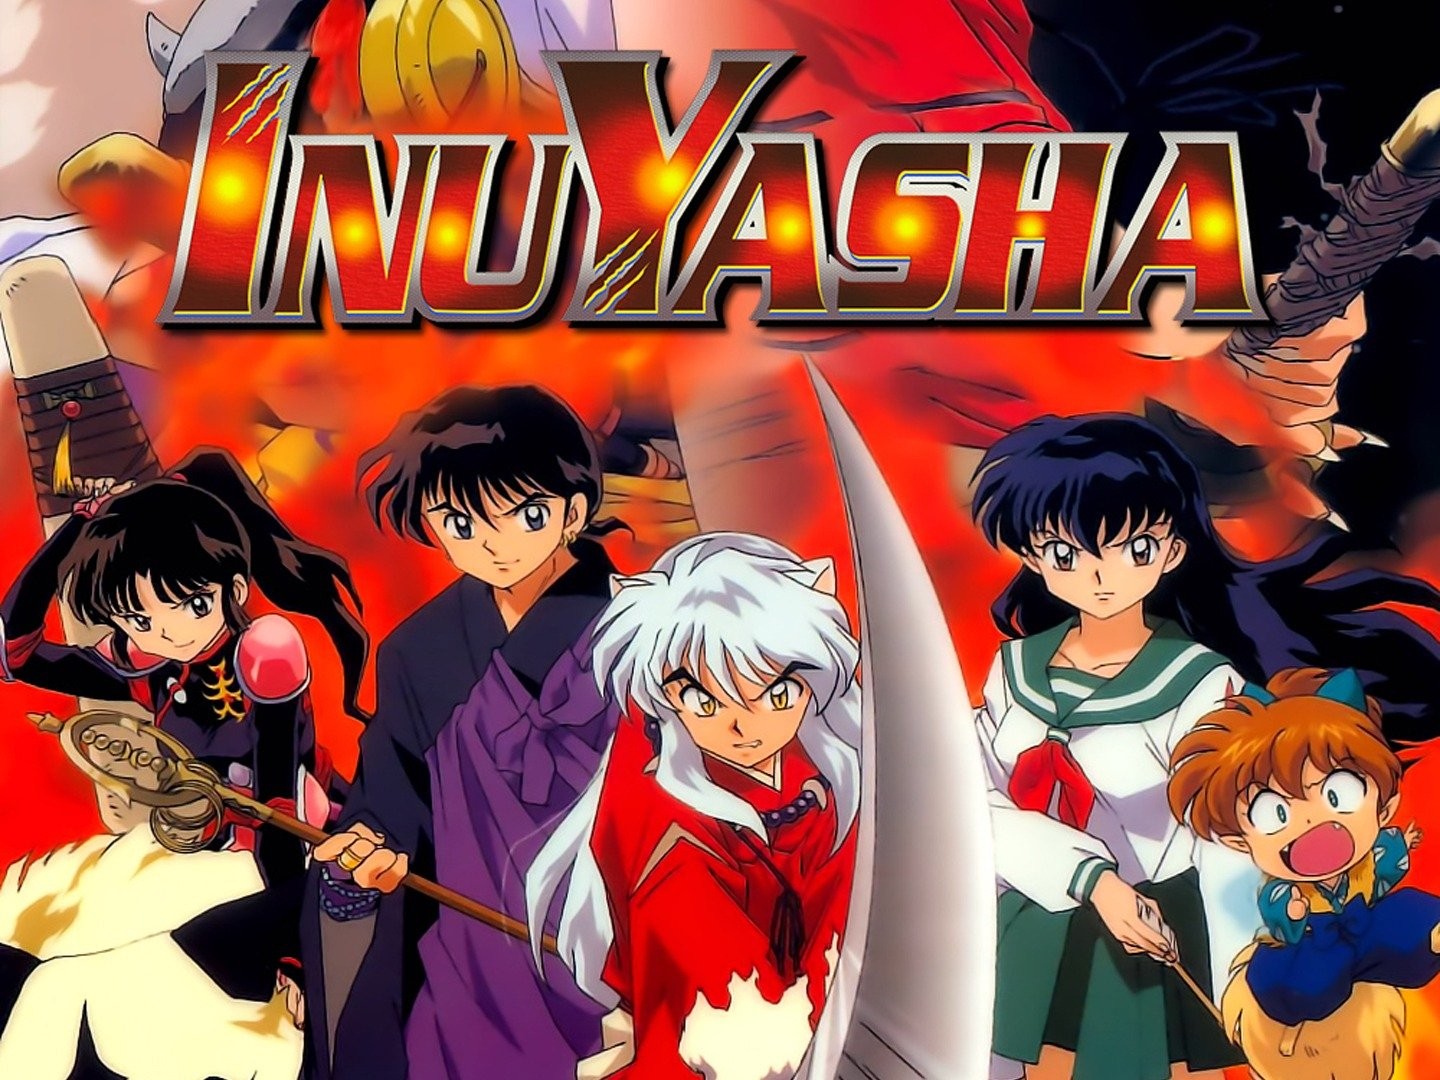 Netflix Streams InuYasha: The Final Act Anime in India on March 25